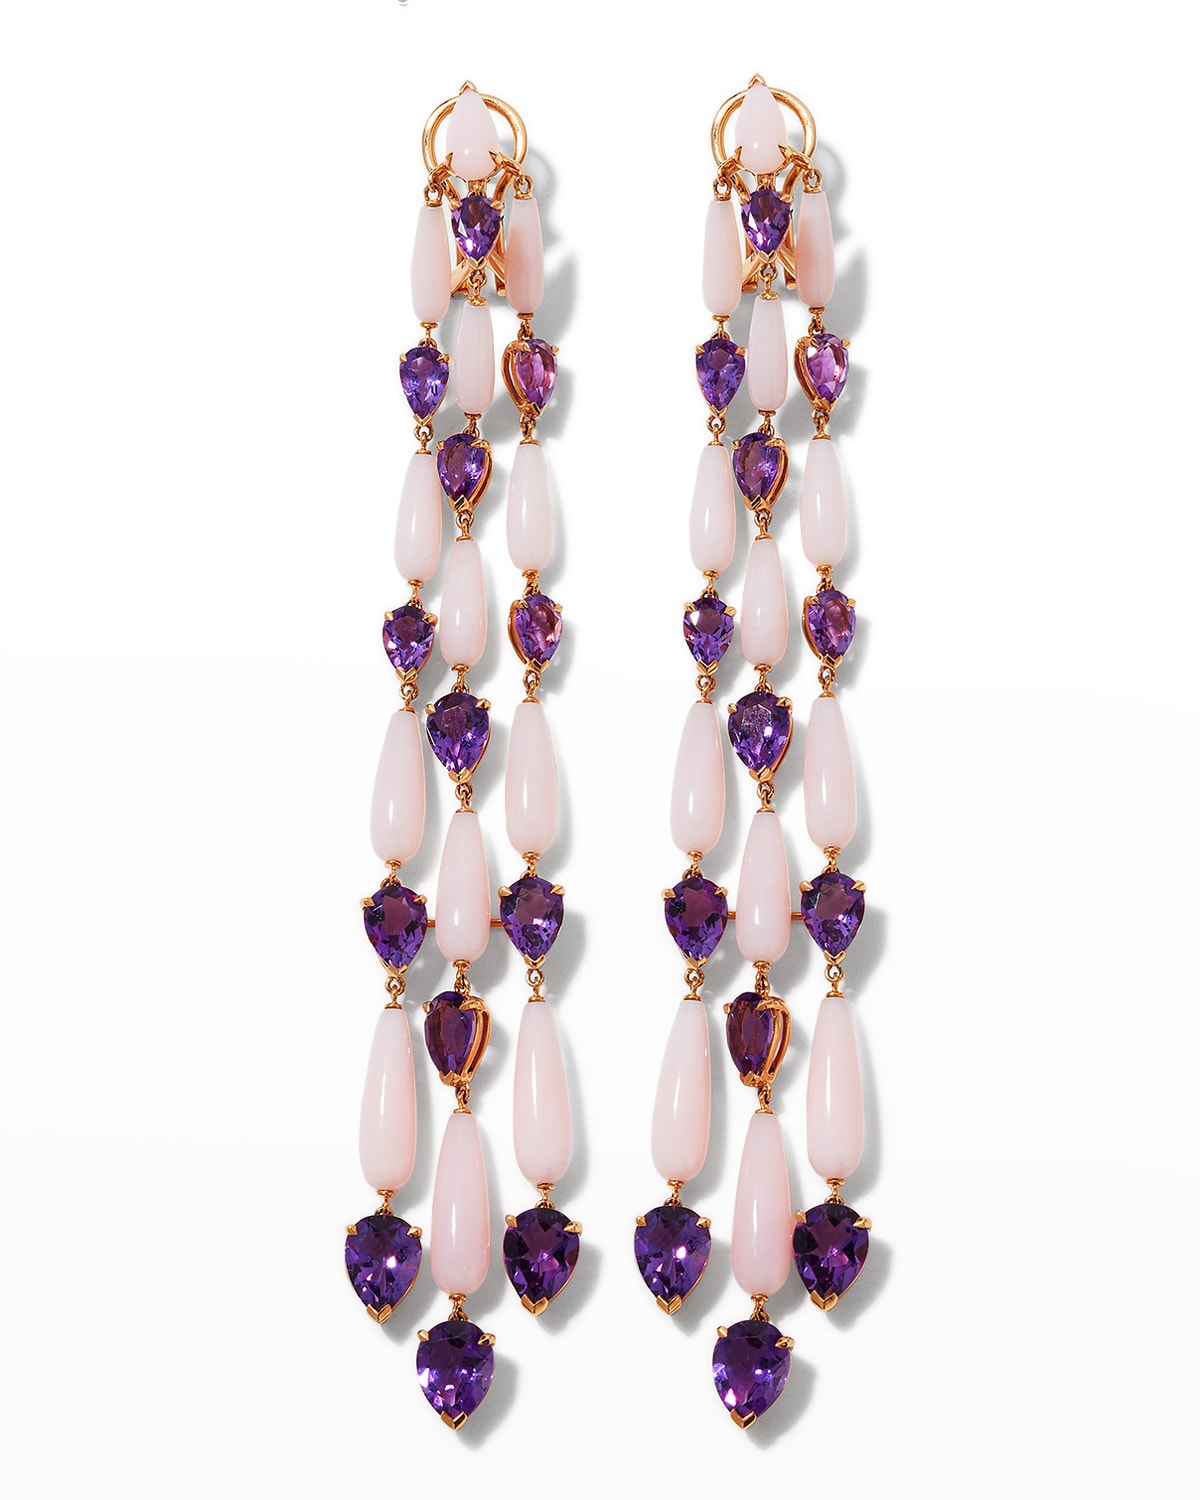 Etho Maria 18k Pink Gold Pear-Cut Amethyst and Pink Opal Earrings